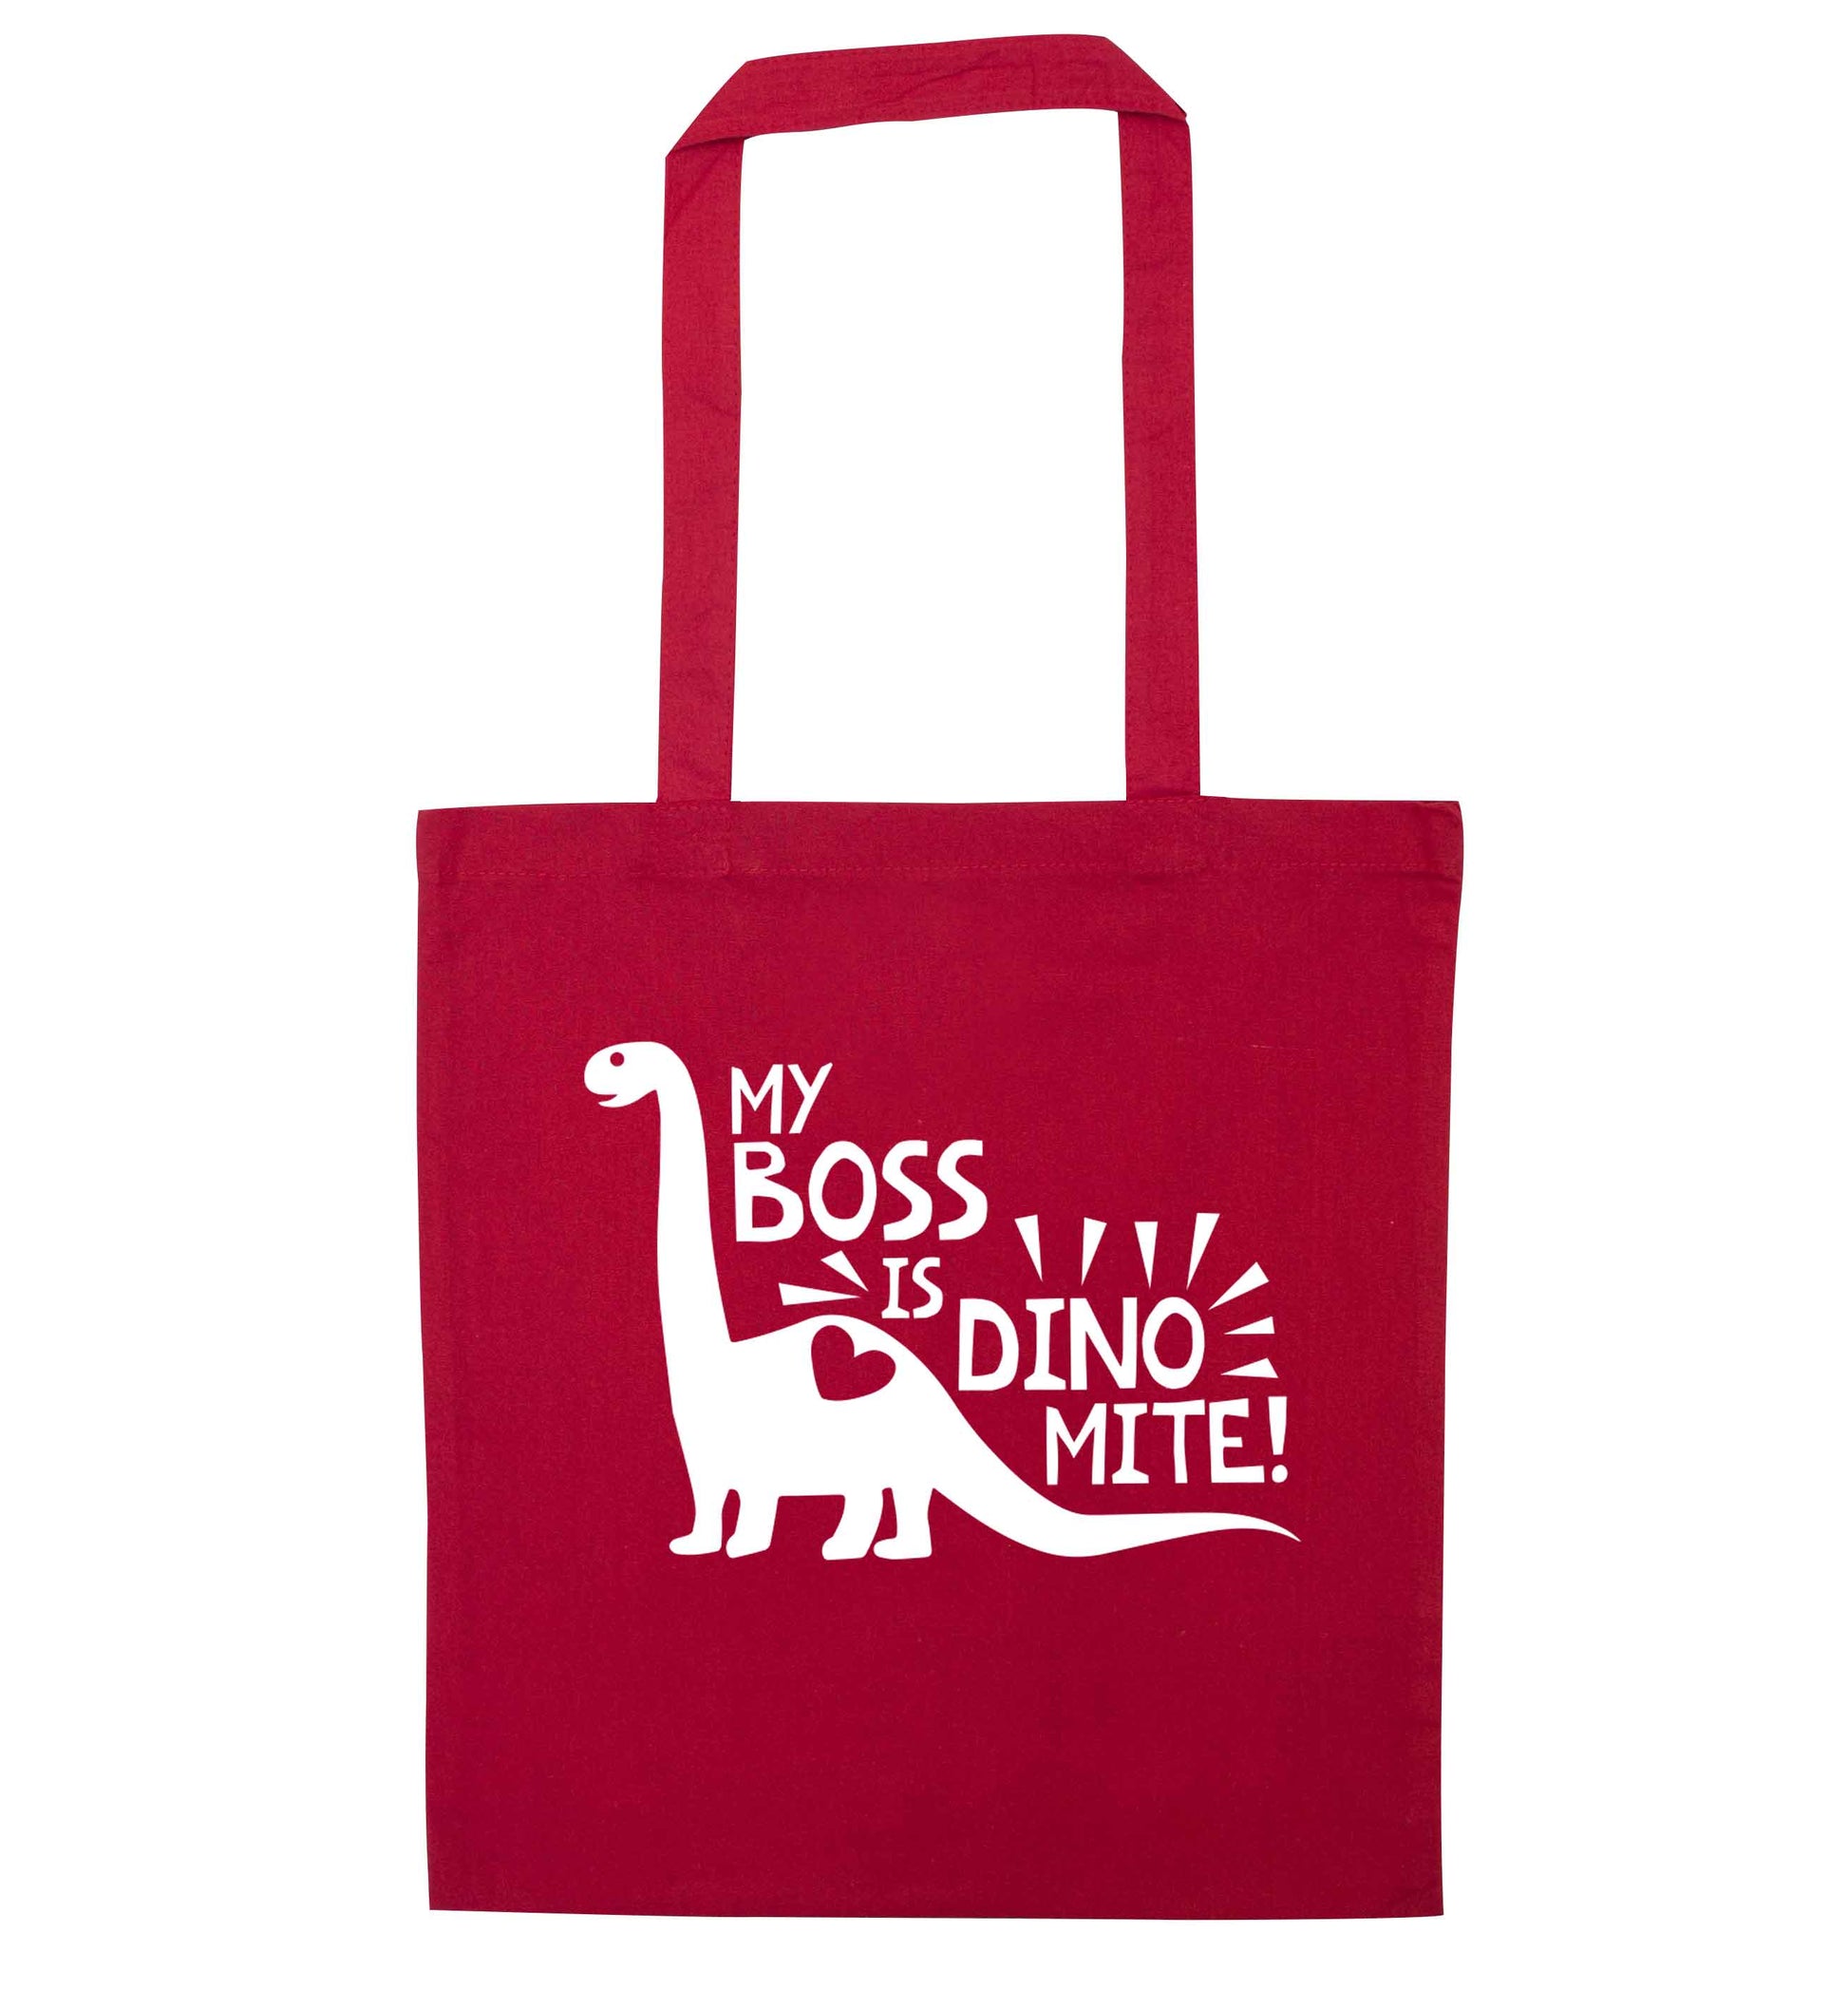 My boss is dinomite! red tote bag